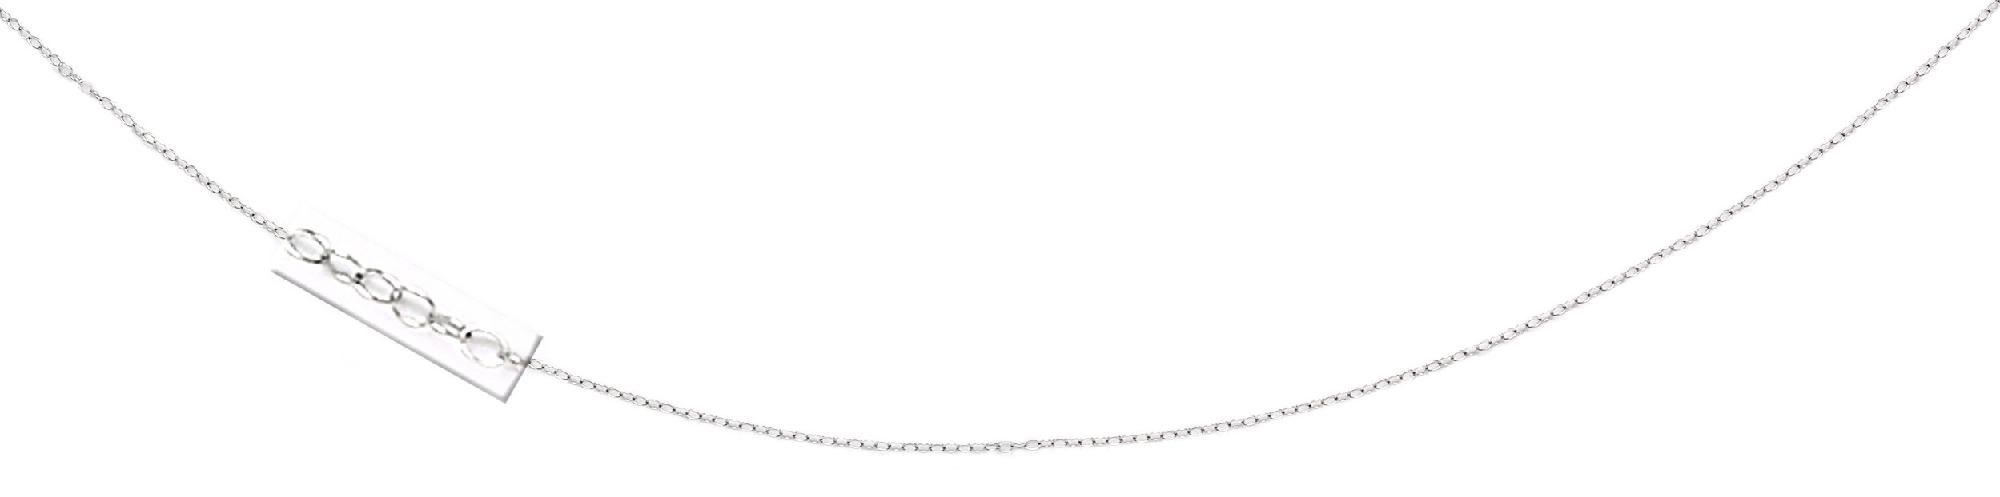 14k White Gold Cable Chain Pendant Necklace - 20 Inch